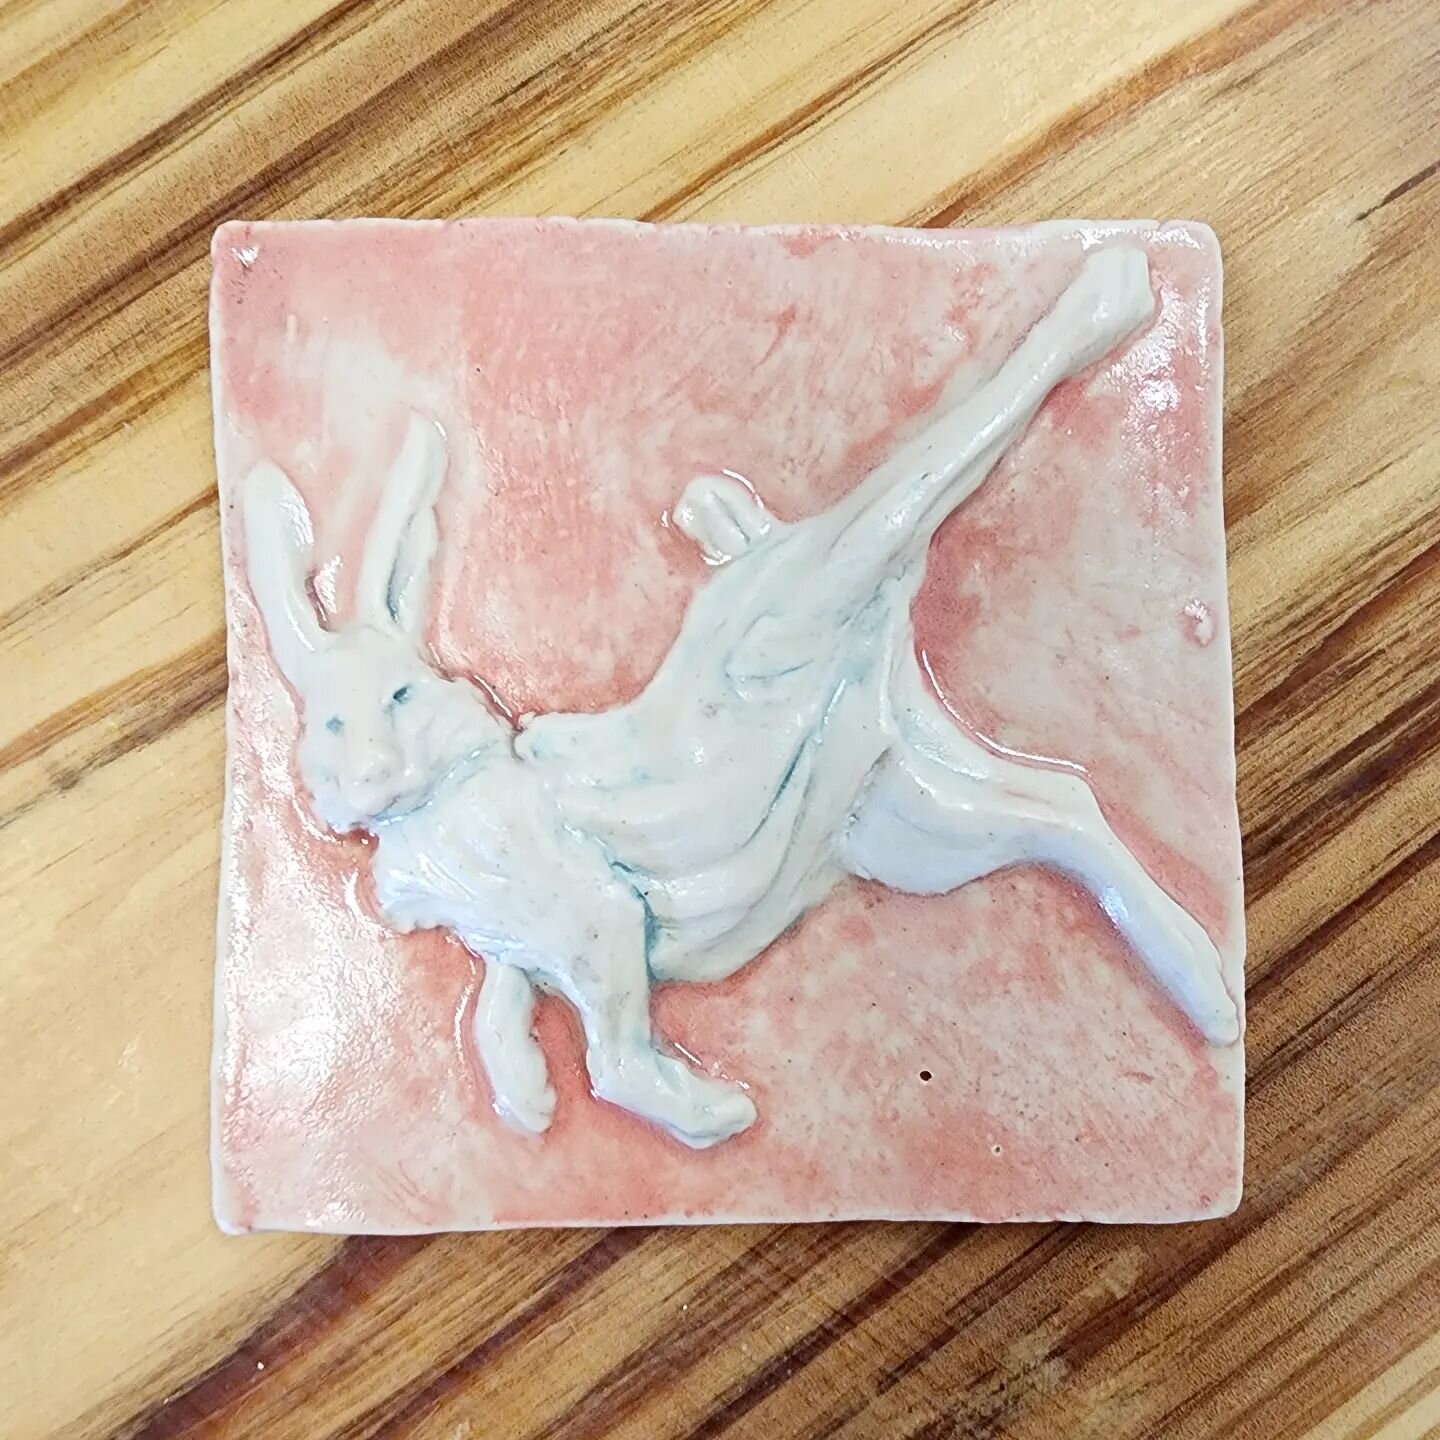 Morgan's tile class is open for registration! Learn how to create a unique tile series using sculpting methods and mold making. For more information,  visit our link in bio and check out our class series. 
.
.
.
.
.
.
.
.
#artstpete #studio #potteryc